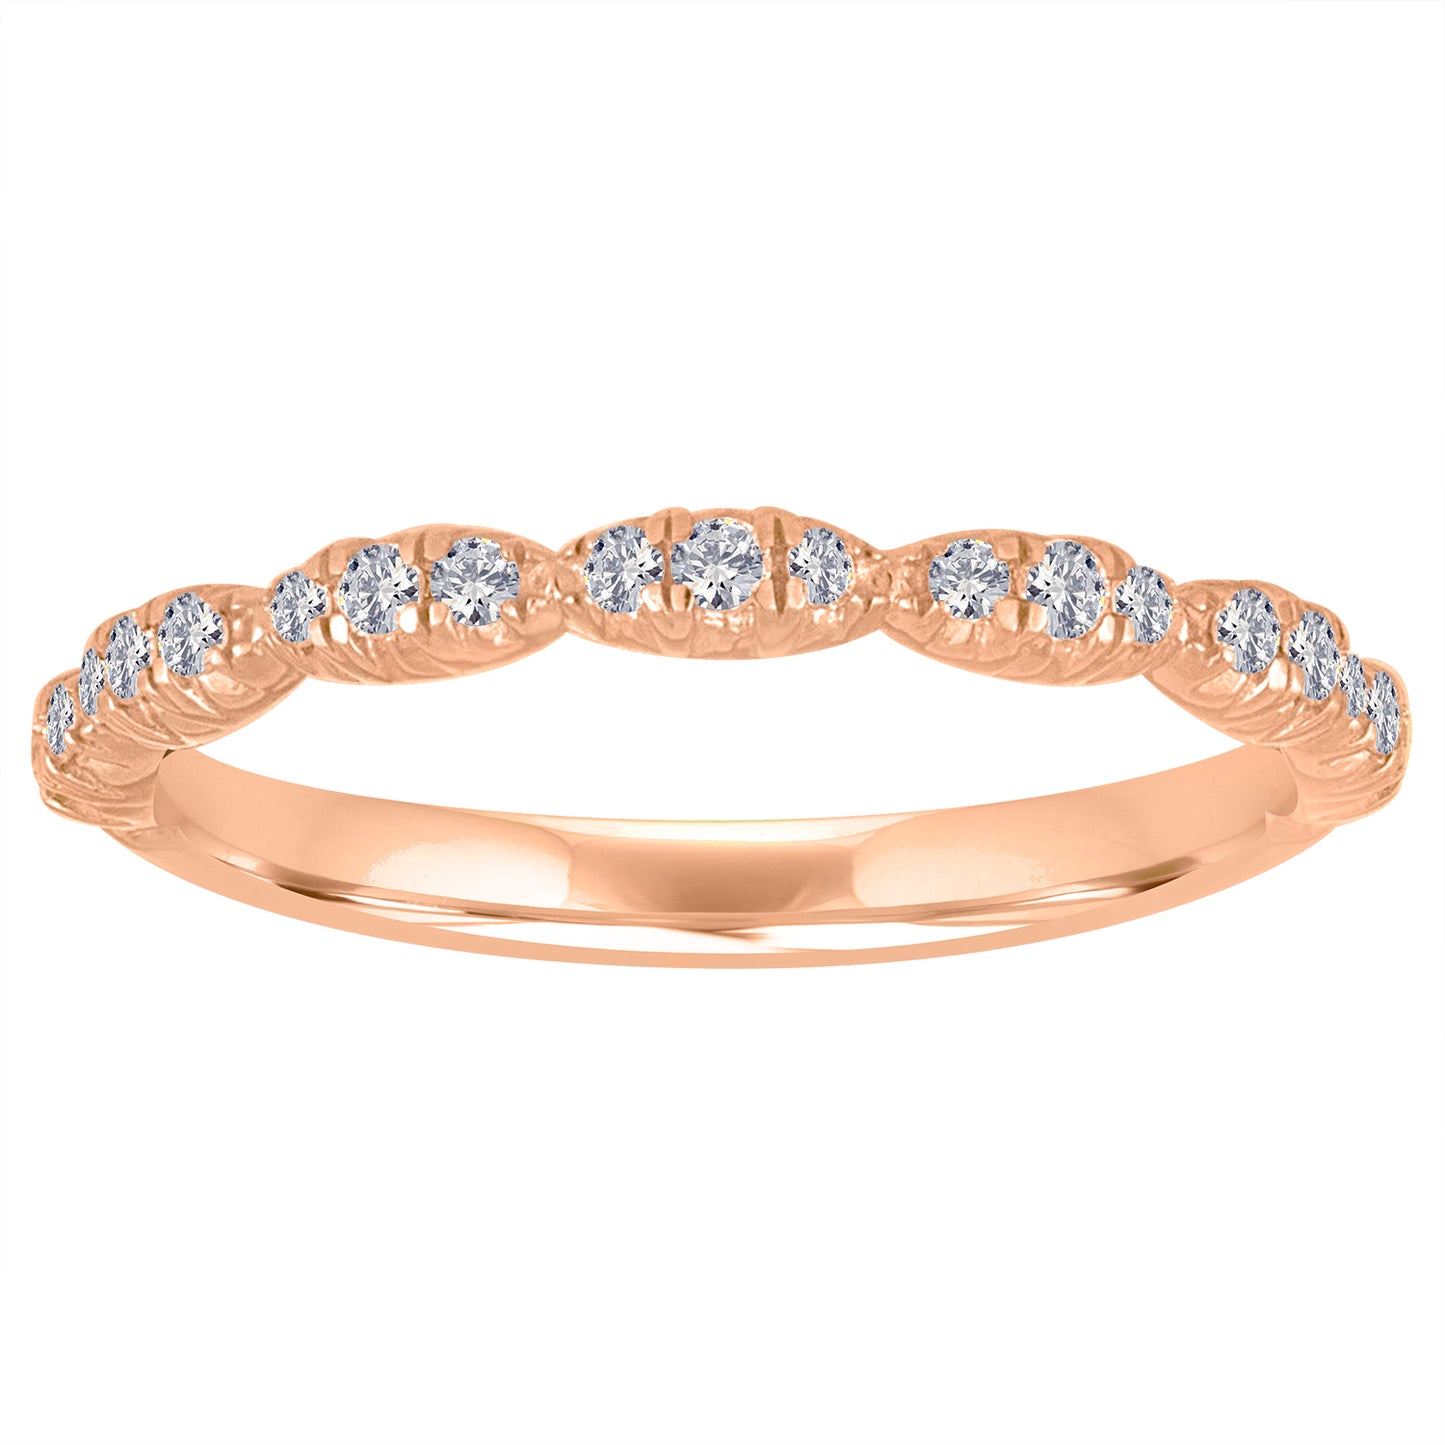 Rose gold skinny micro pave band with round diamonds. 